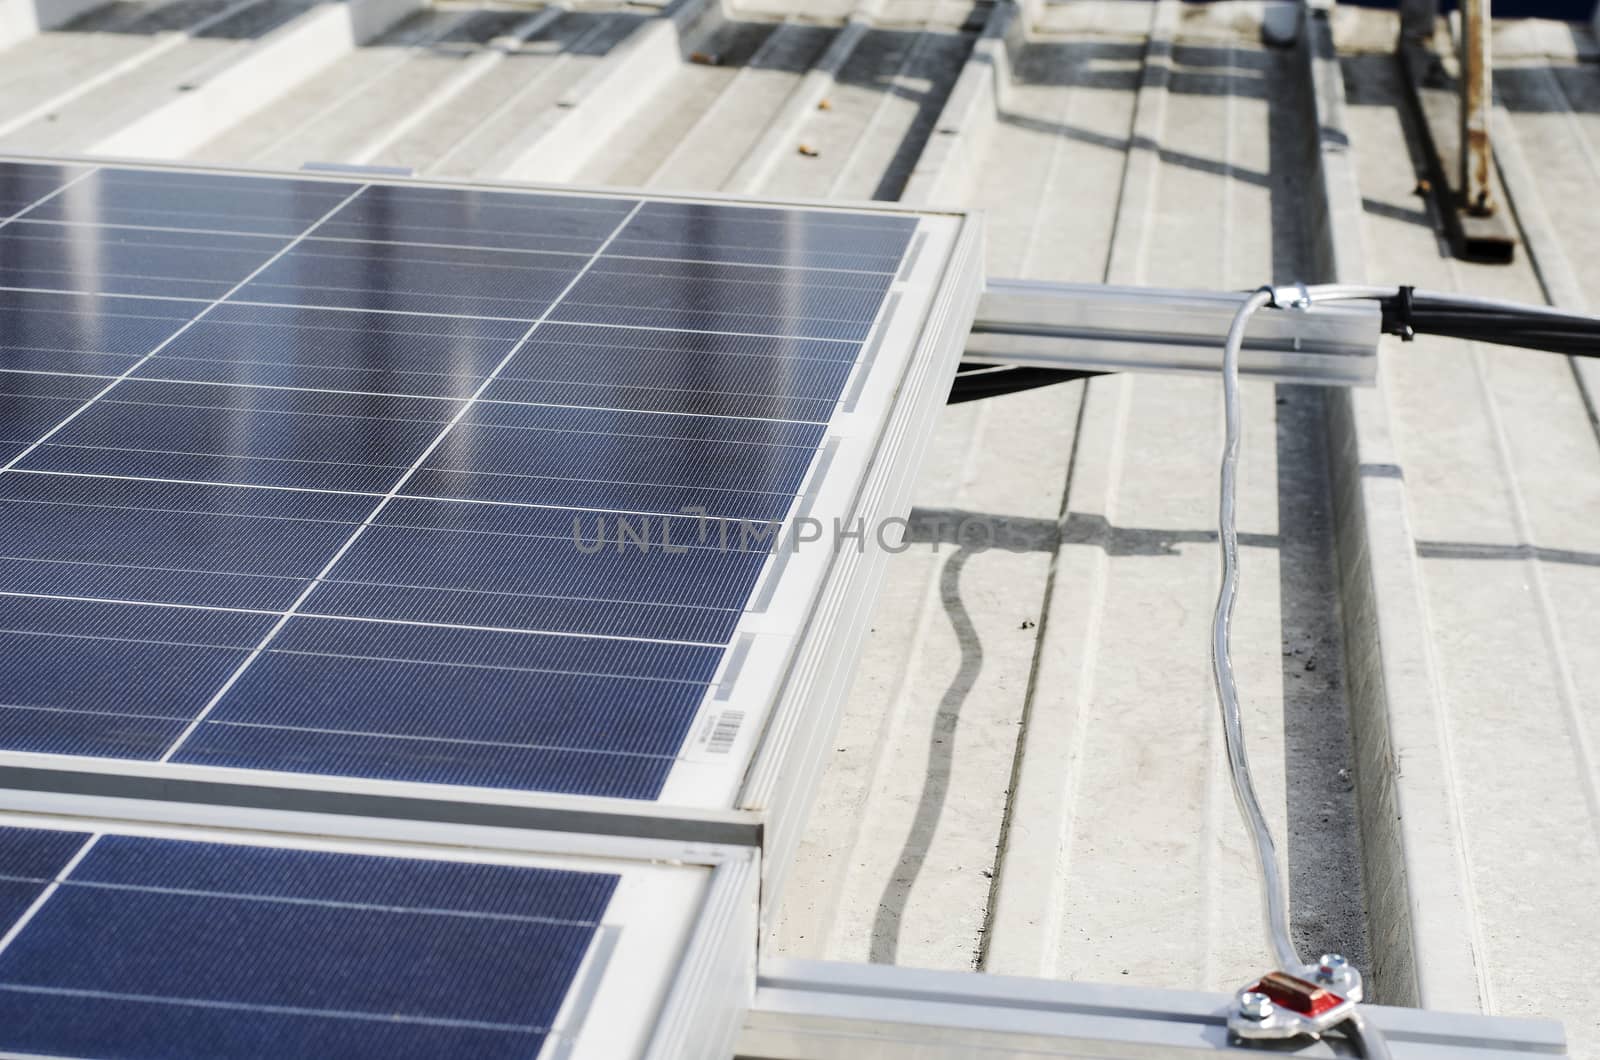 Closeup of solar panels and polycrystalline photovoltaic cells